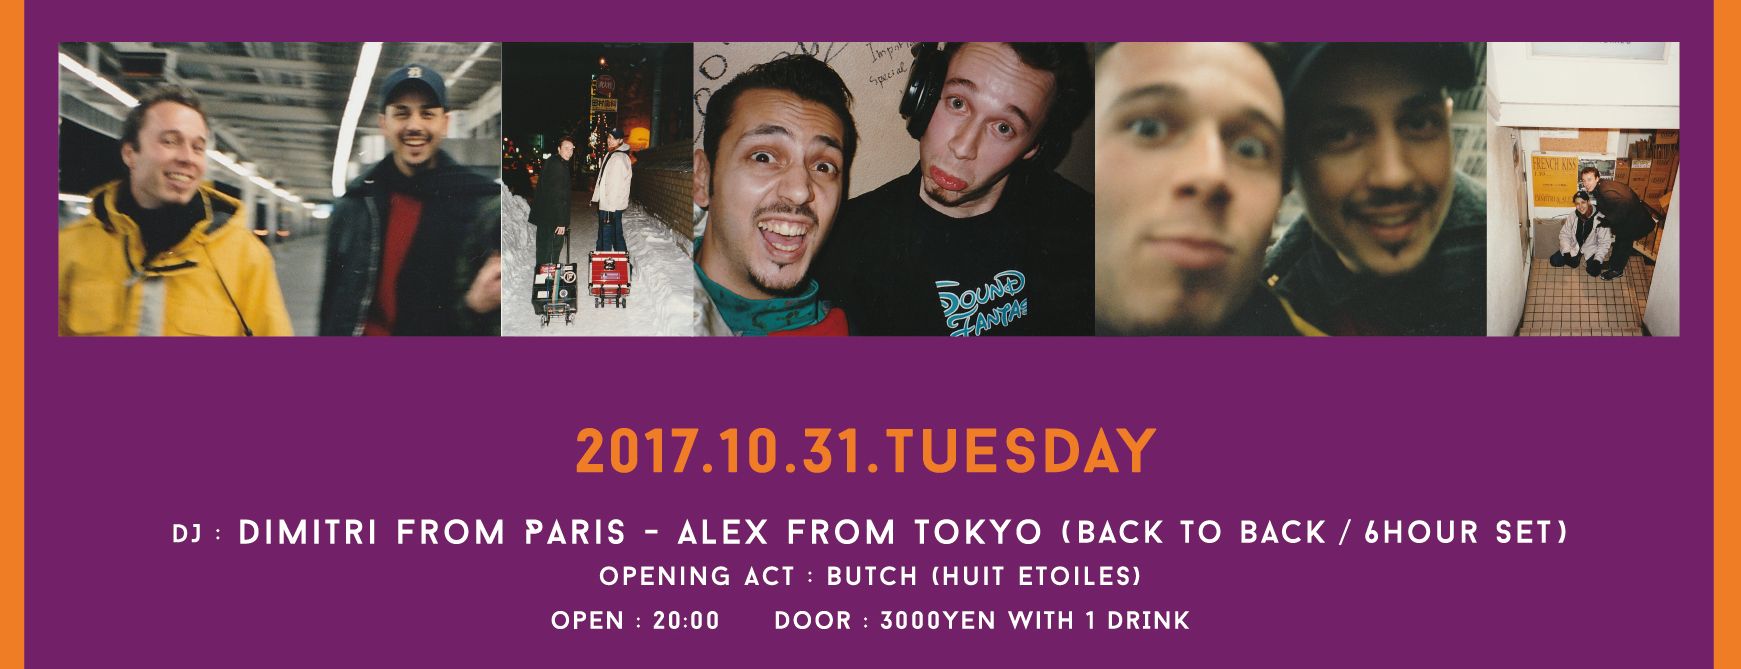 secretbox presents… Dimitri From Paris – Alex From Tokyo French Connection in Tokyo Halloween 15th Anniversary